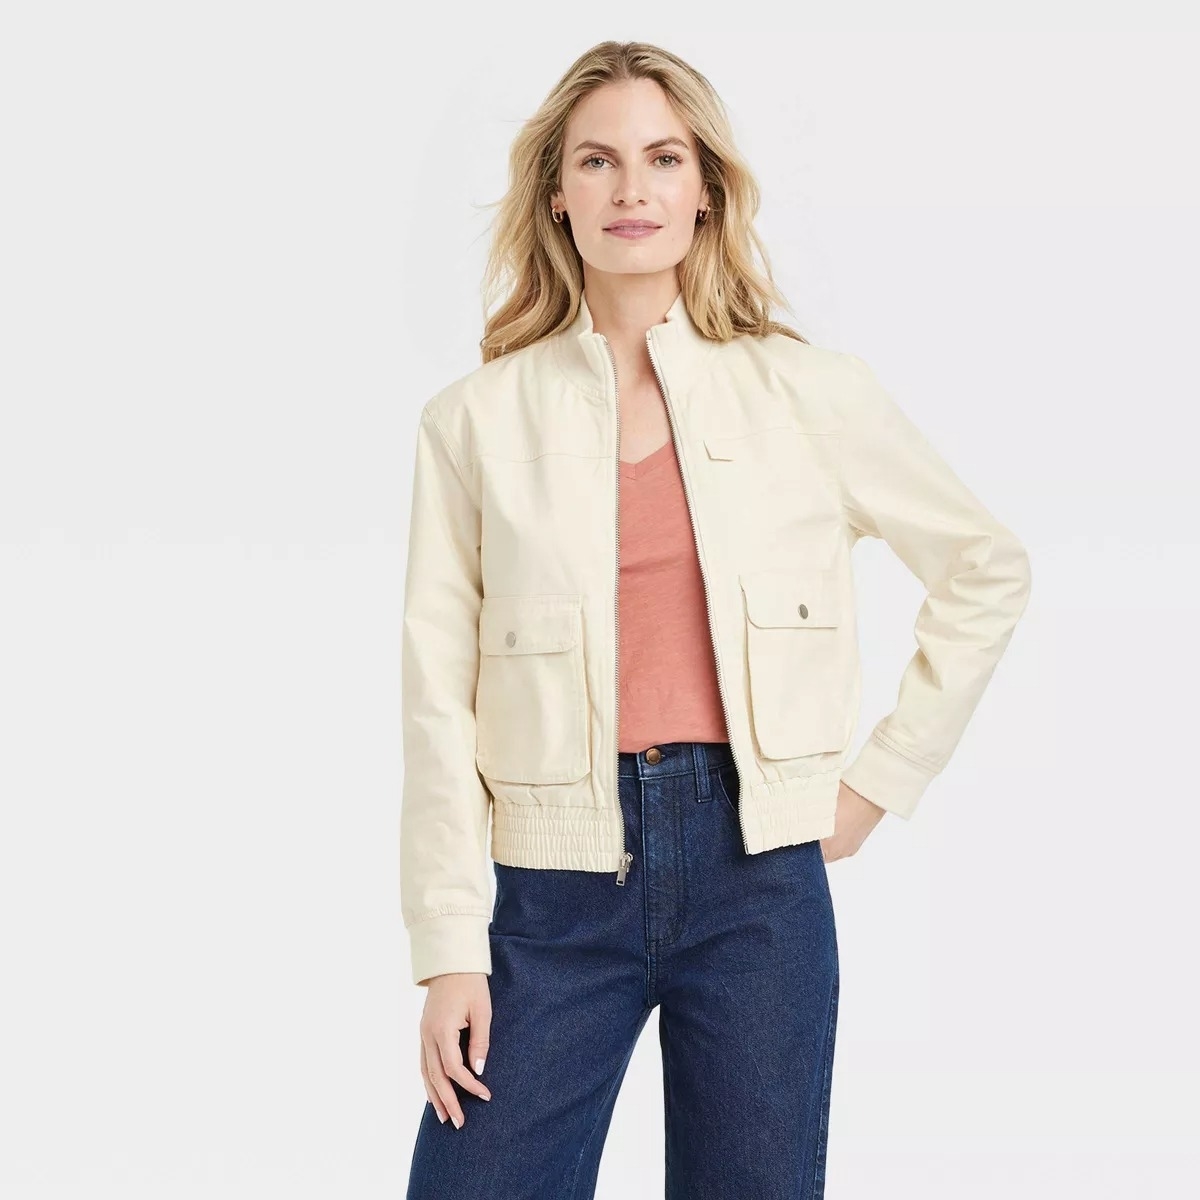 model in a casual cream jacket and jeans with hands in pockets